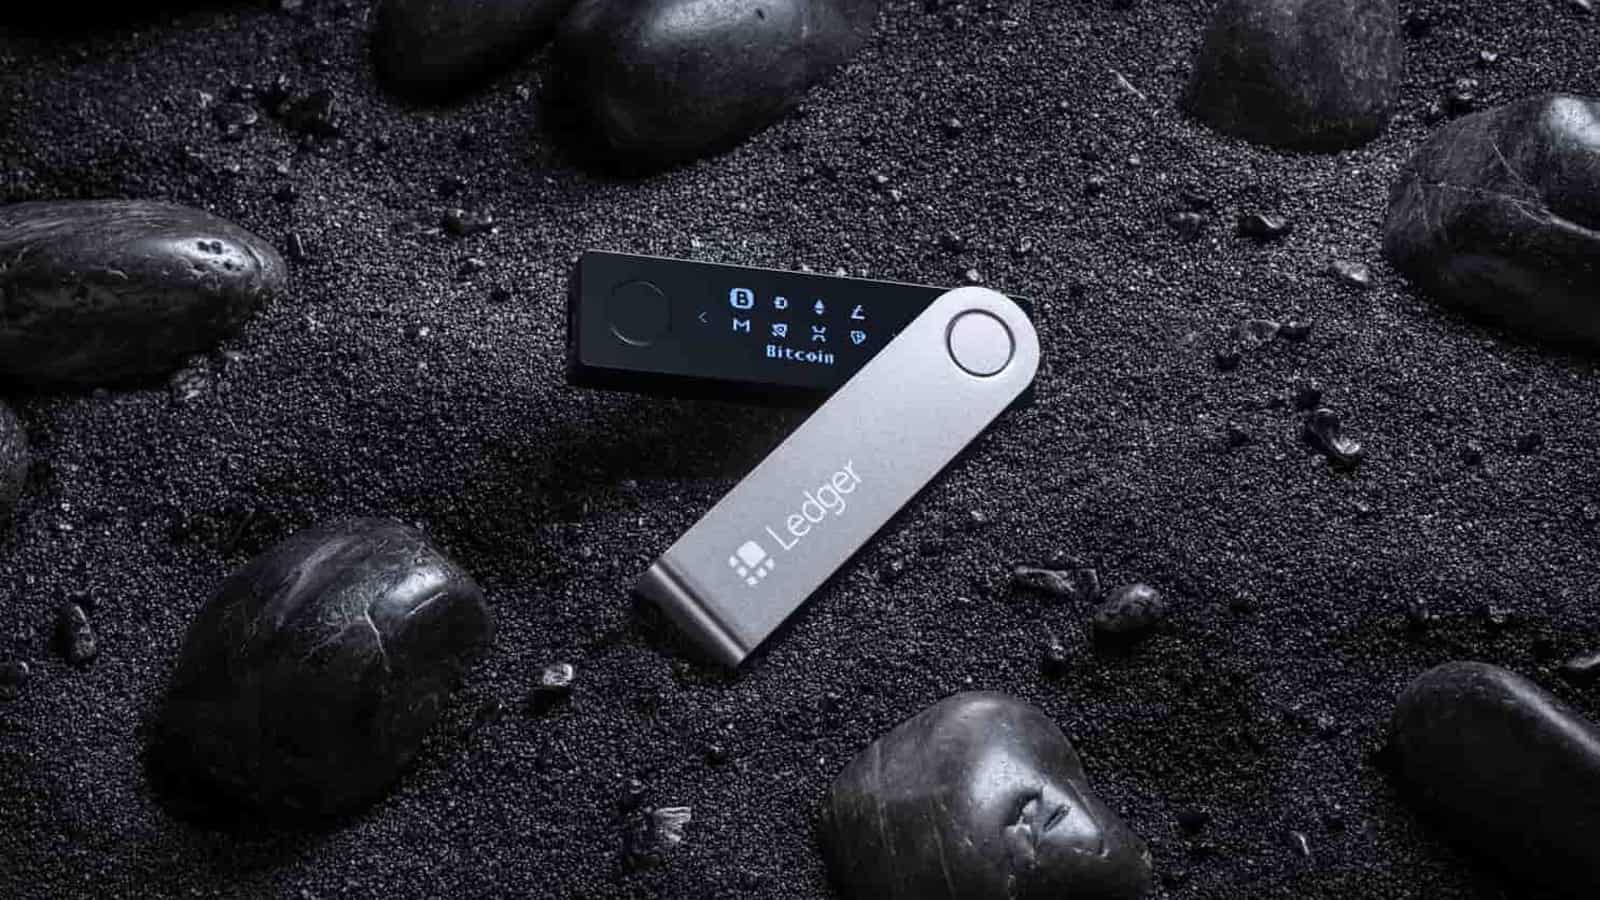  Scammers are mailing fake Ledger devices to steal cryptocurrency